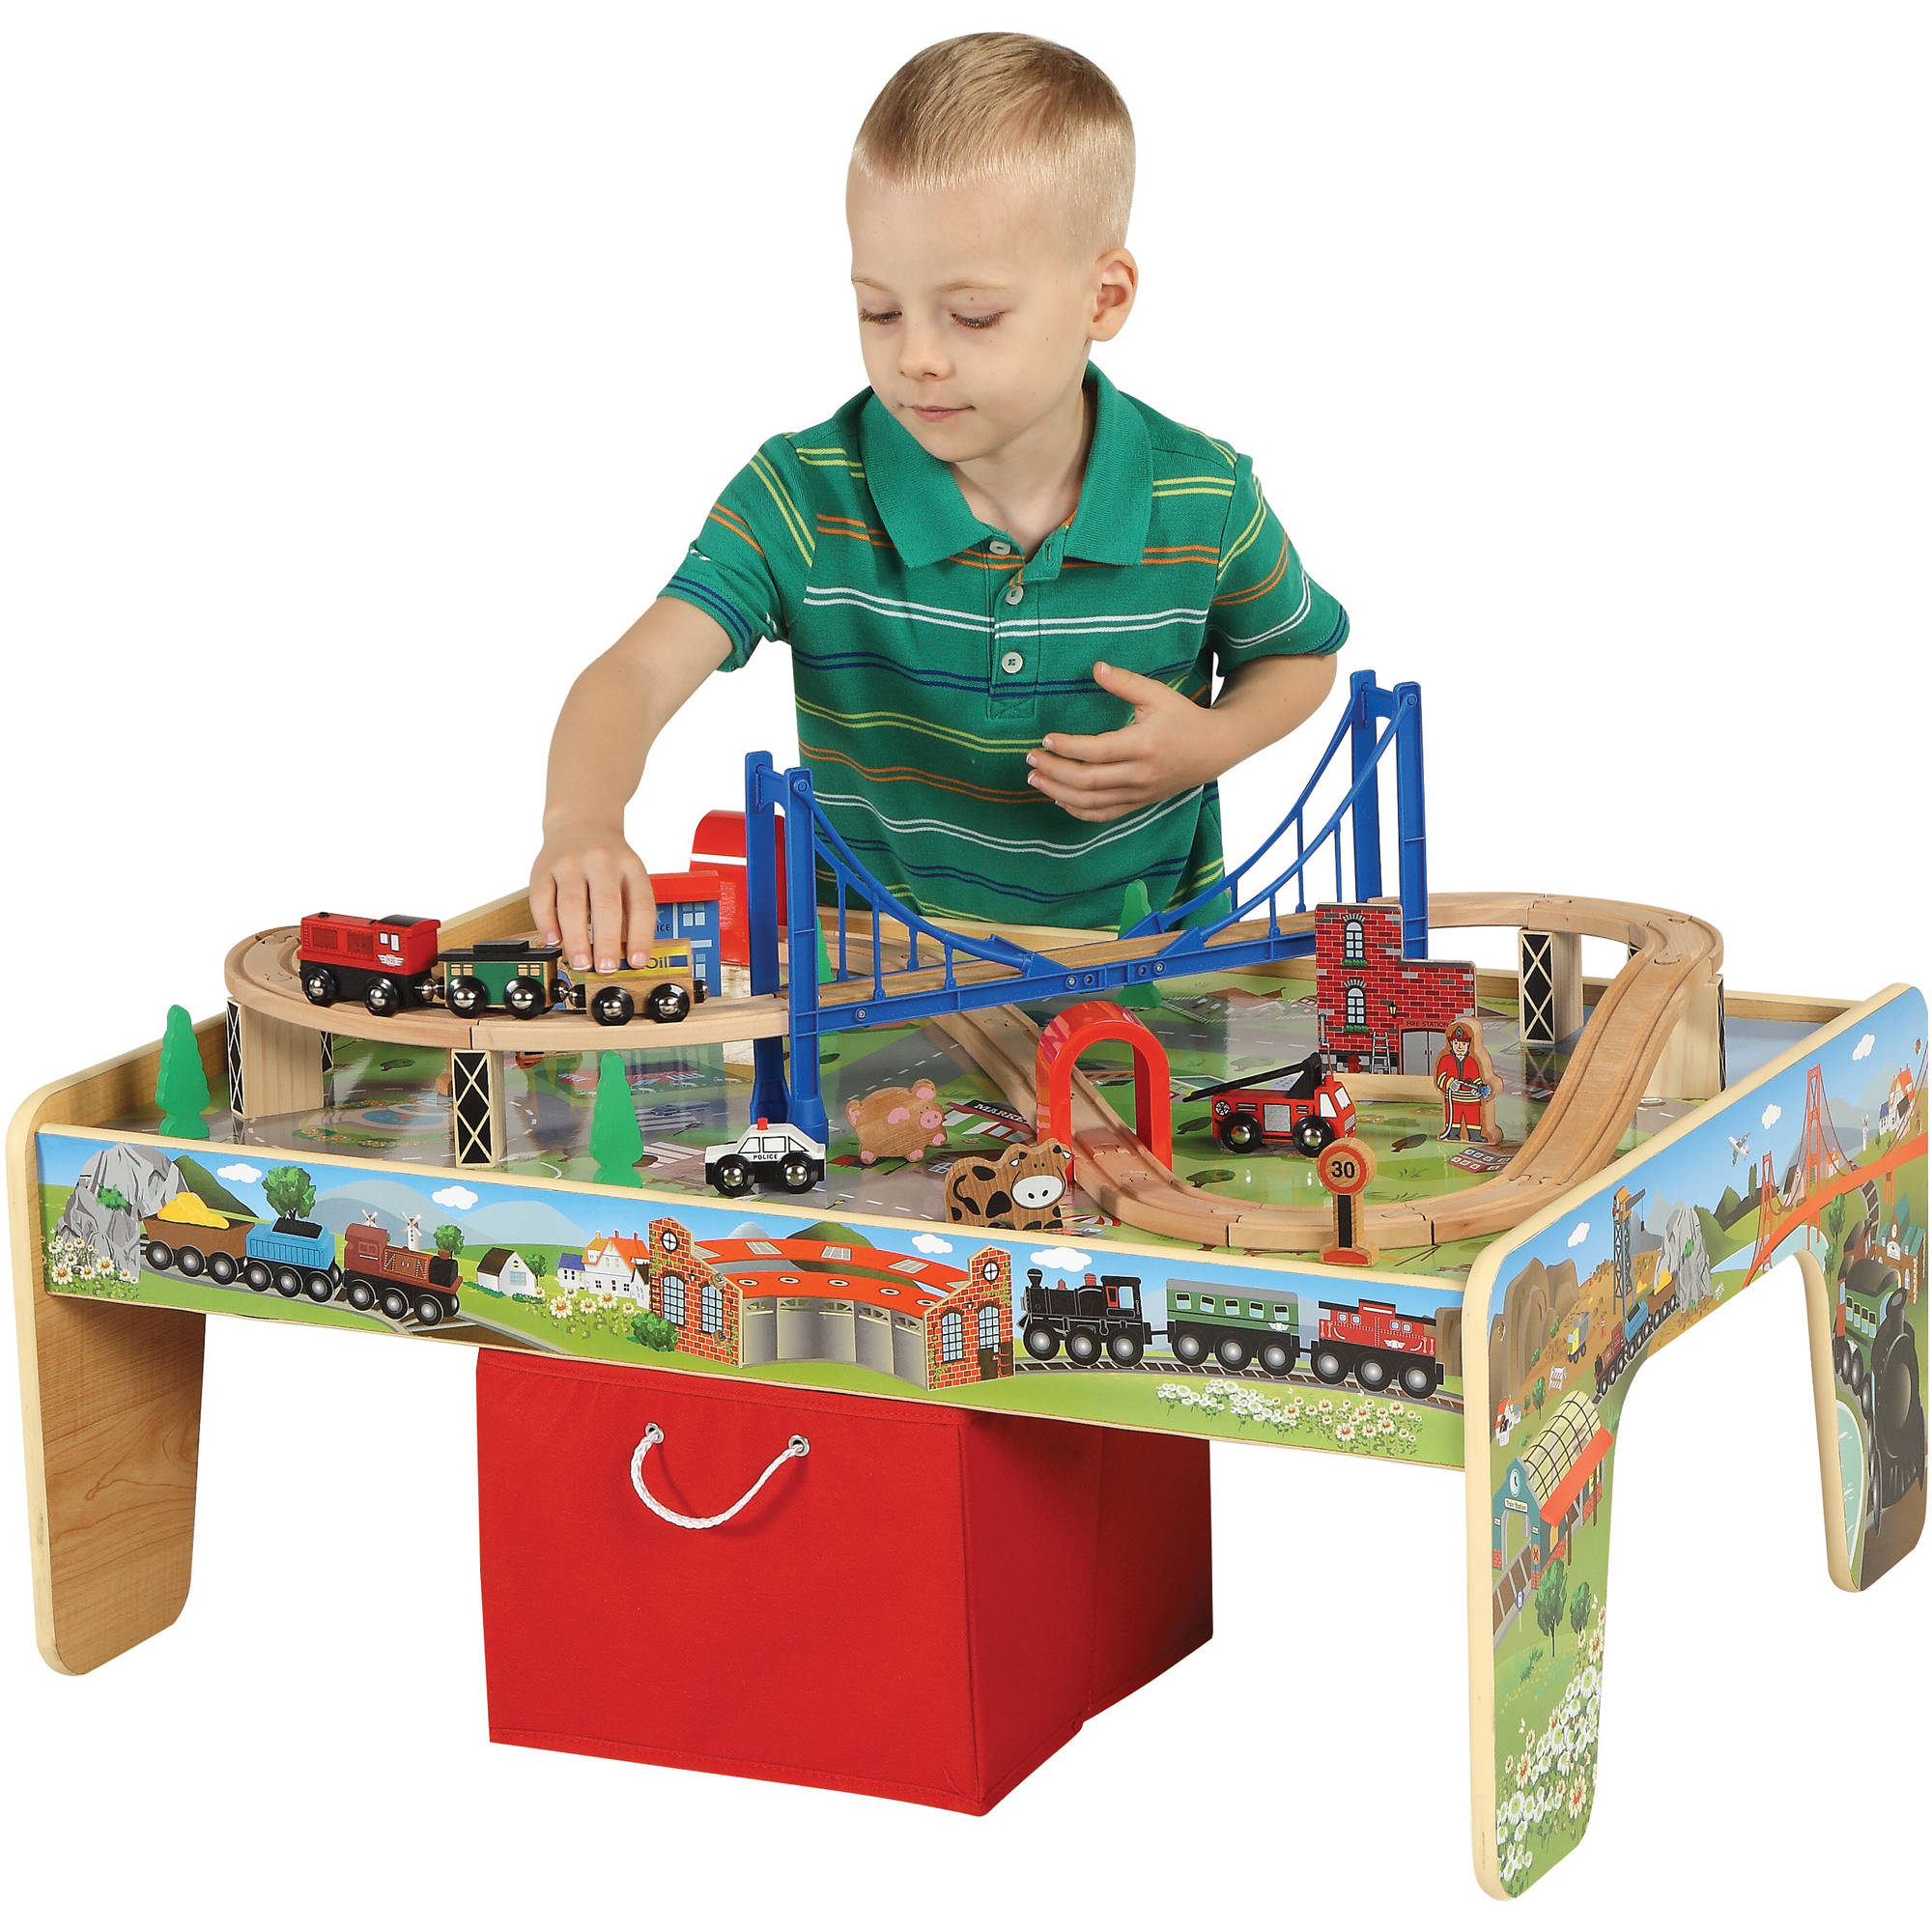 Maxim Train Activity Table (50 Pieces) Toy Trains - image 2 of 3